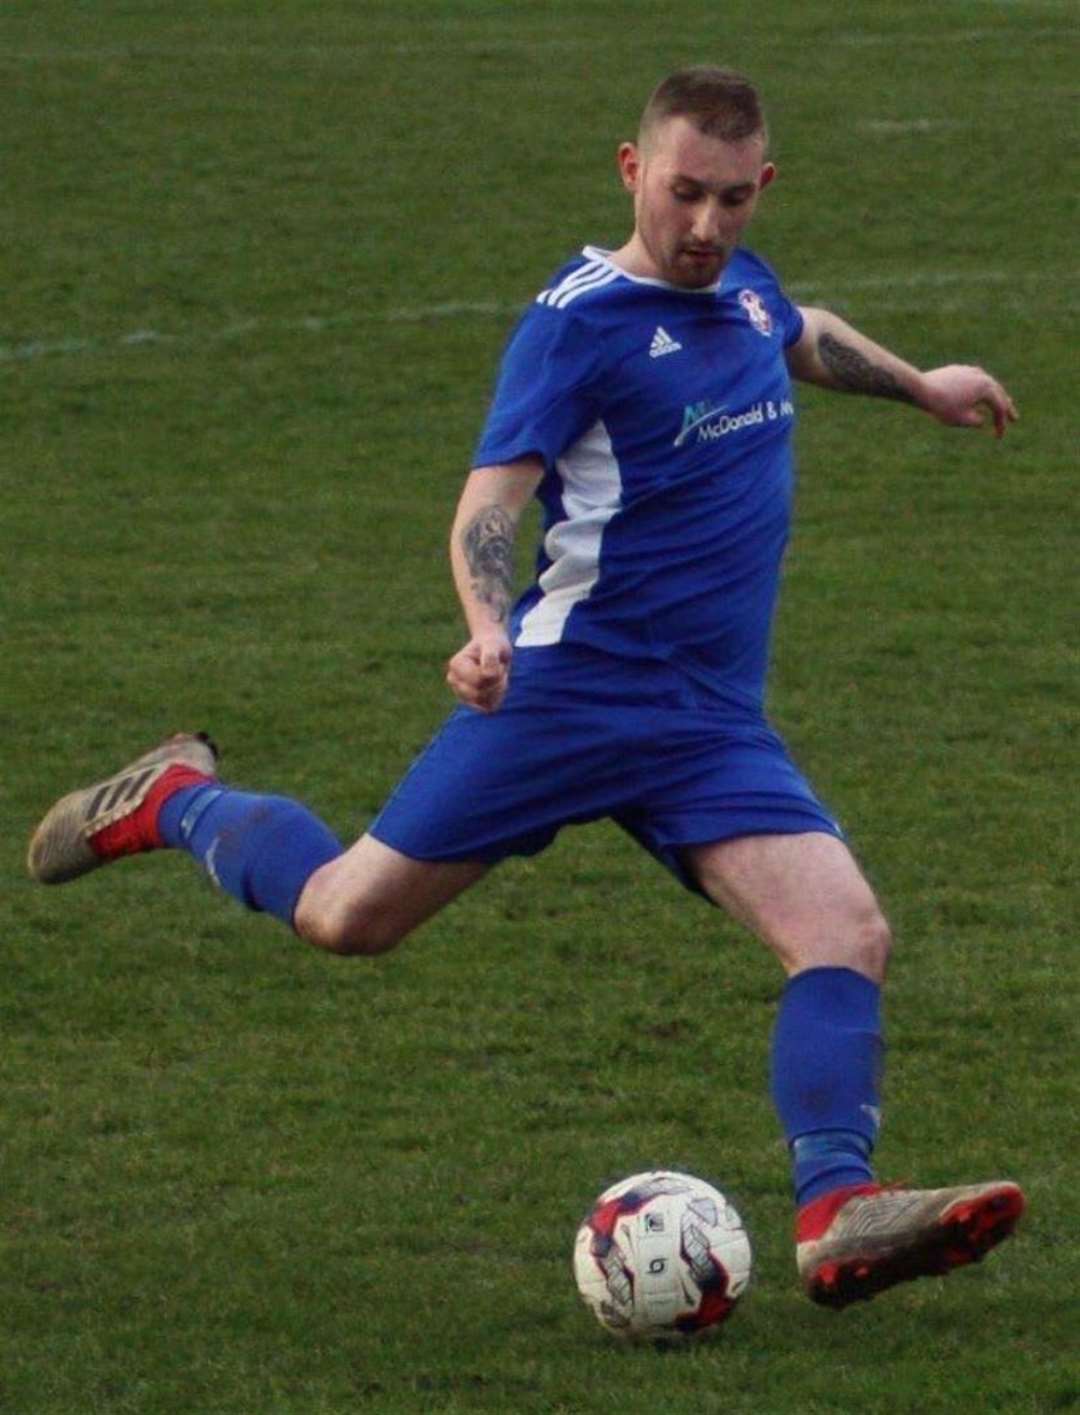 Dean McCall in action for Lossiemouth.